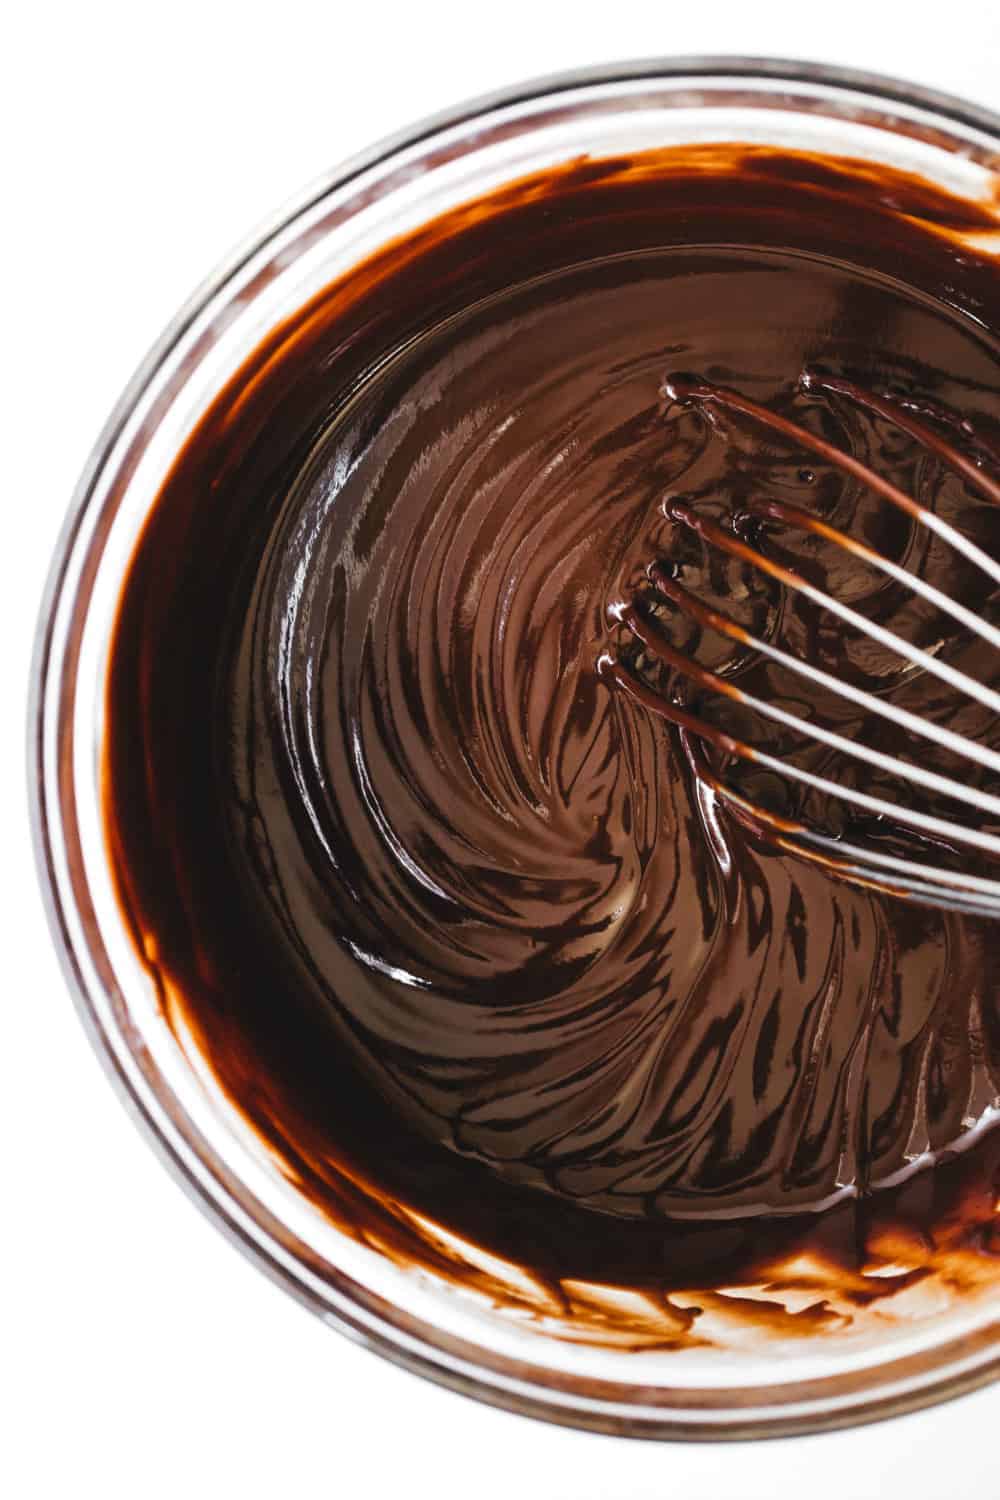 Follow a few easy steps to make your own Simple Homemade Truffles.